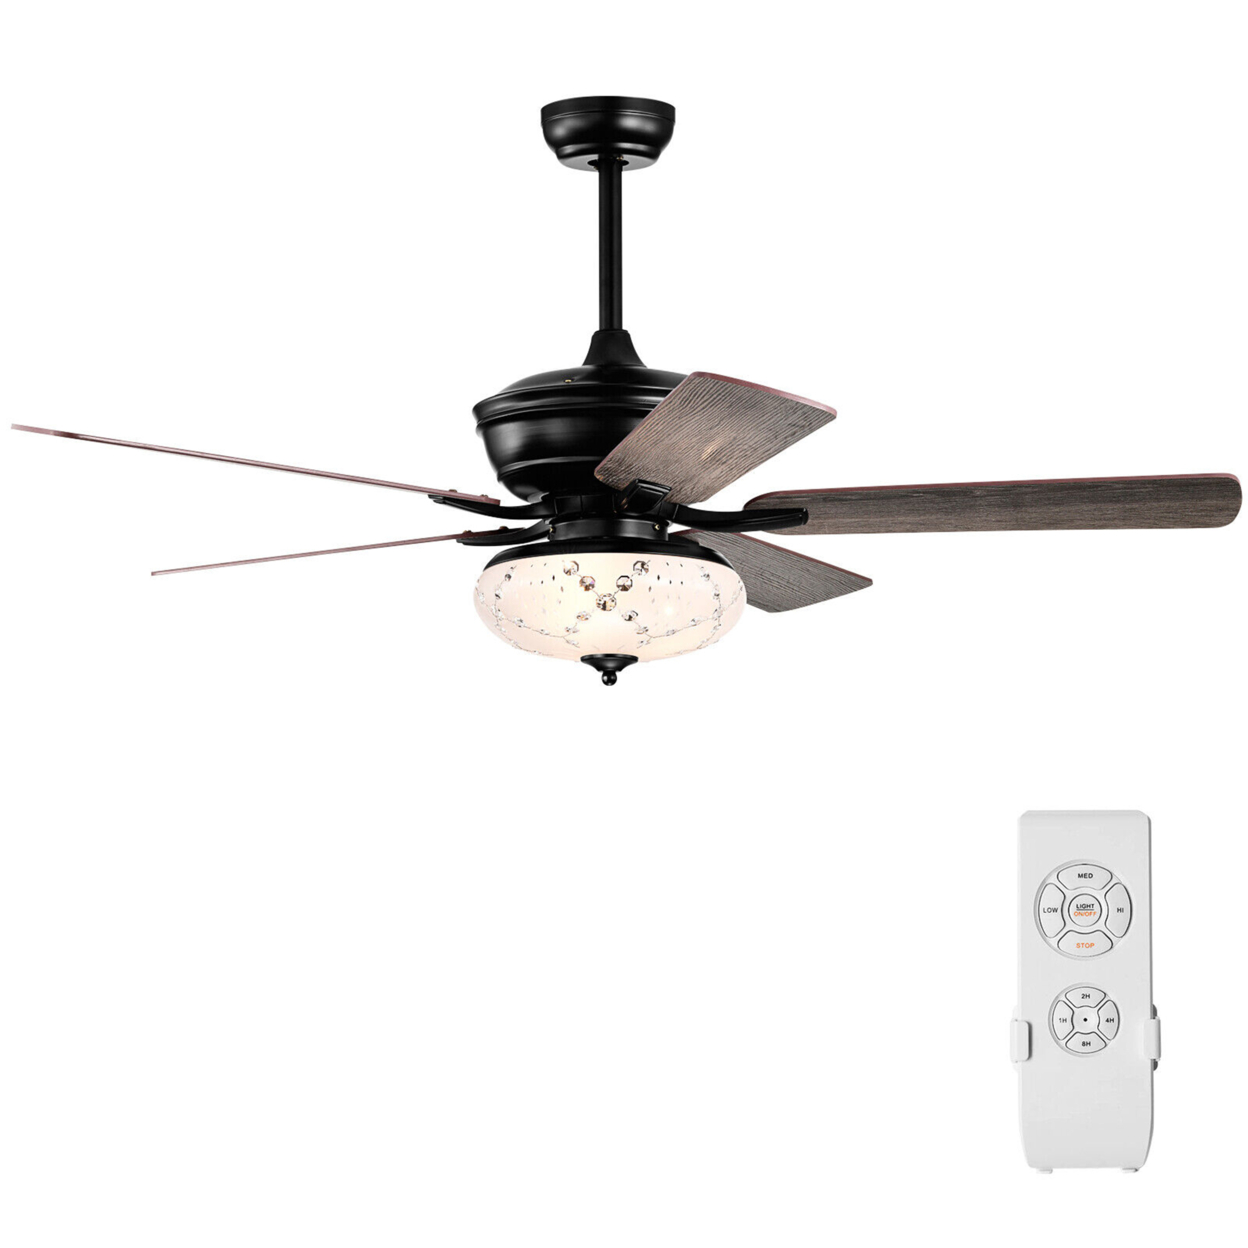 52'' Ceiling Fan With 3 Wind Speeds 5 Reversible Blades & Remote Control - Grey